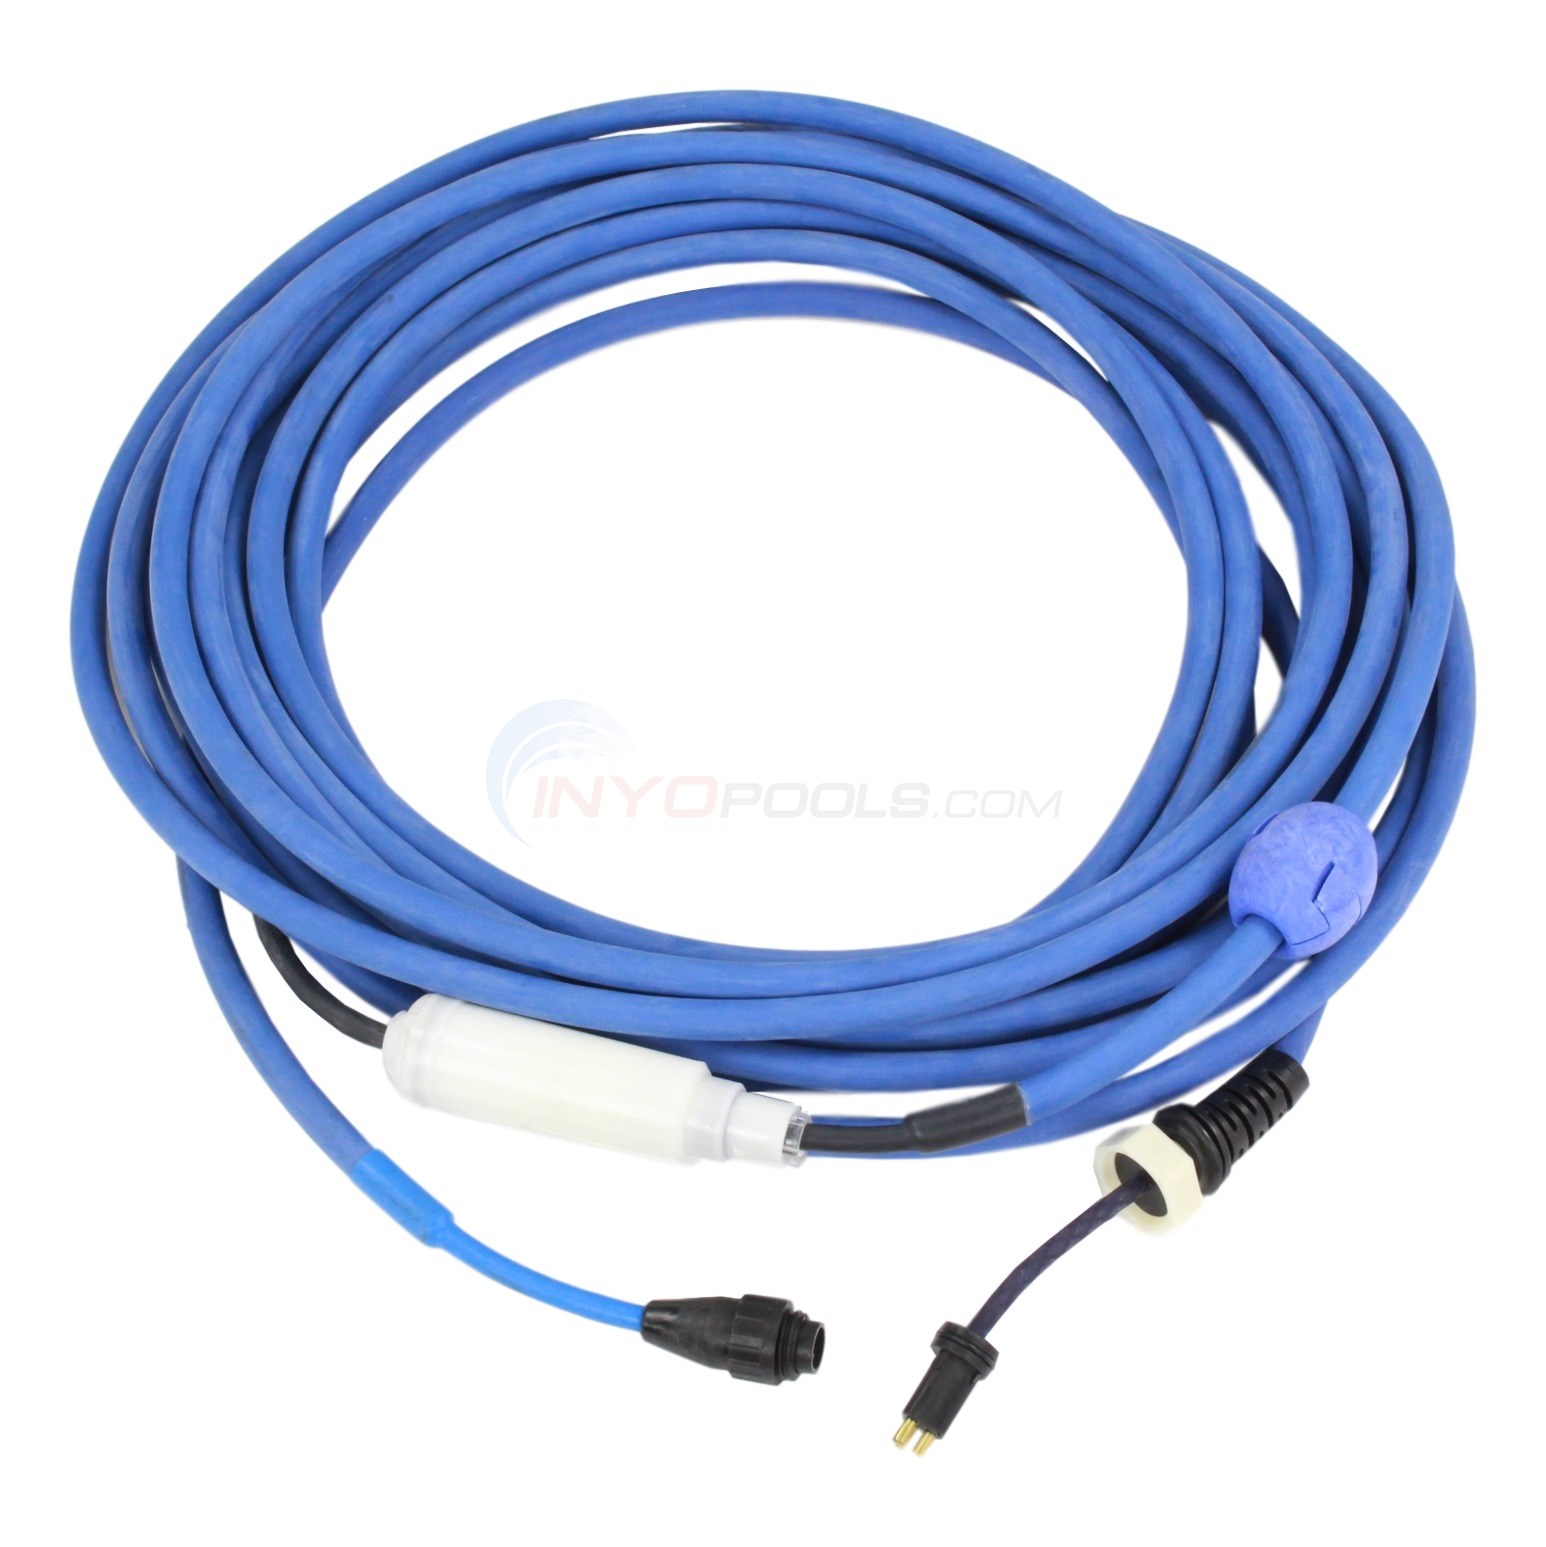 Maytronics Dolph Cable-swivel ASSY 18m 9995872-diy for sale online 